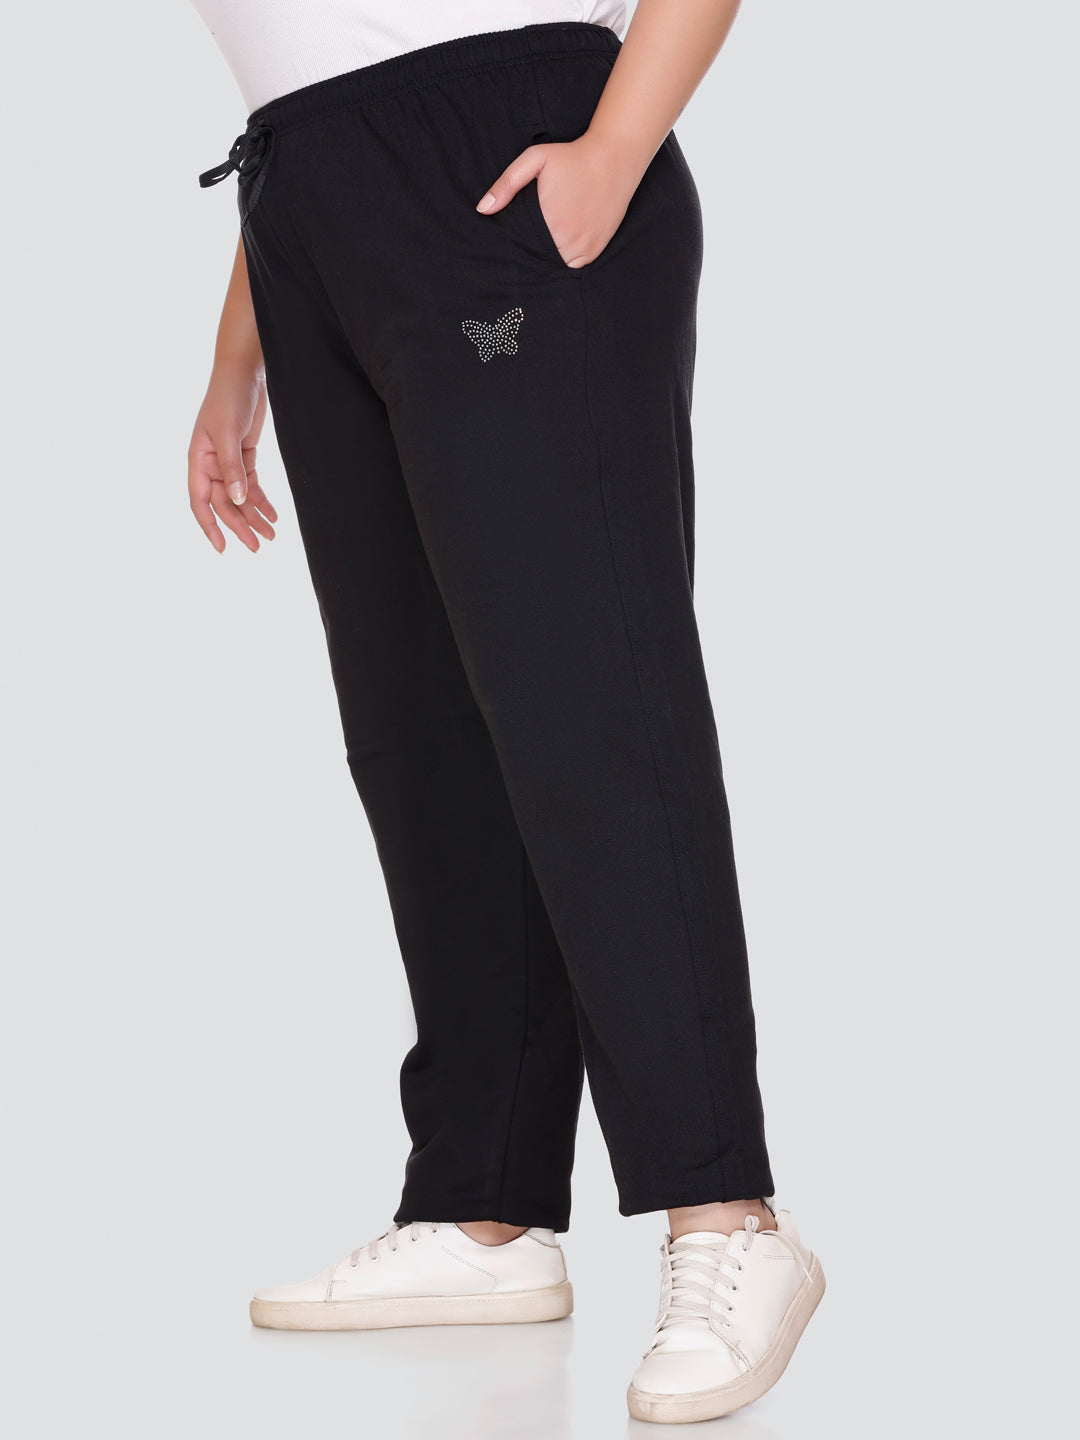 Stylish Black Cotton Winter Fleece Plus Size Track Pants For Women Online In India